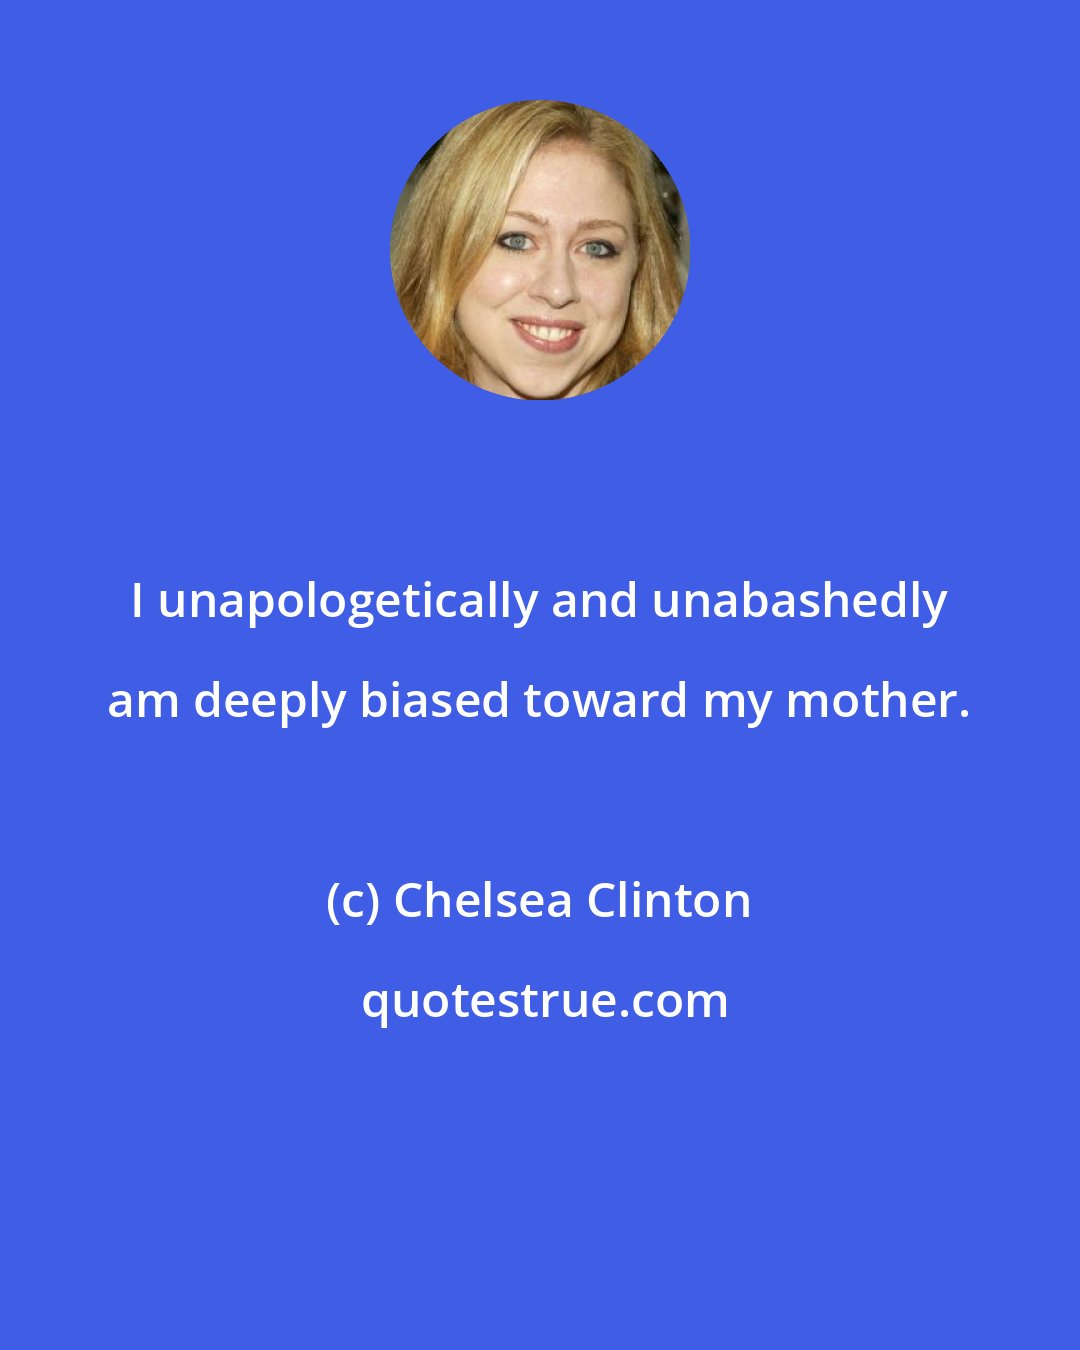 Chelsea Clinton: I unapologetically and unabashedly am deeply biased toward my mother.